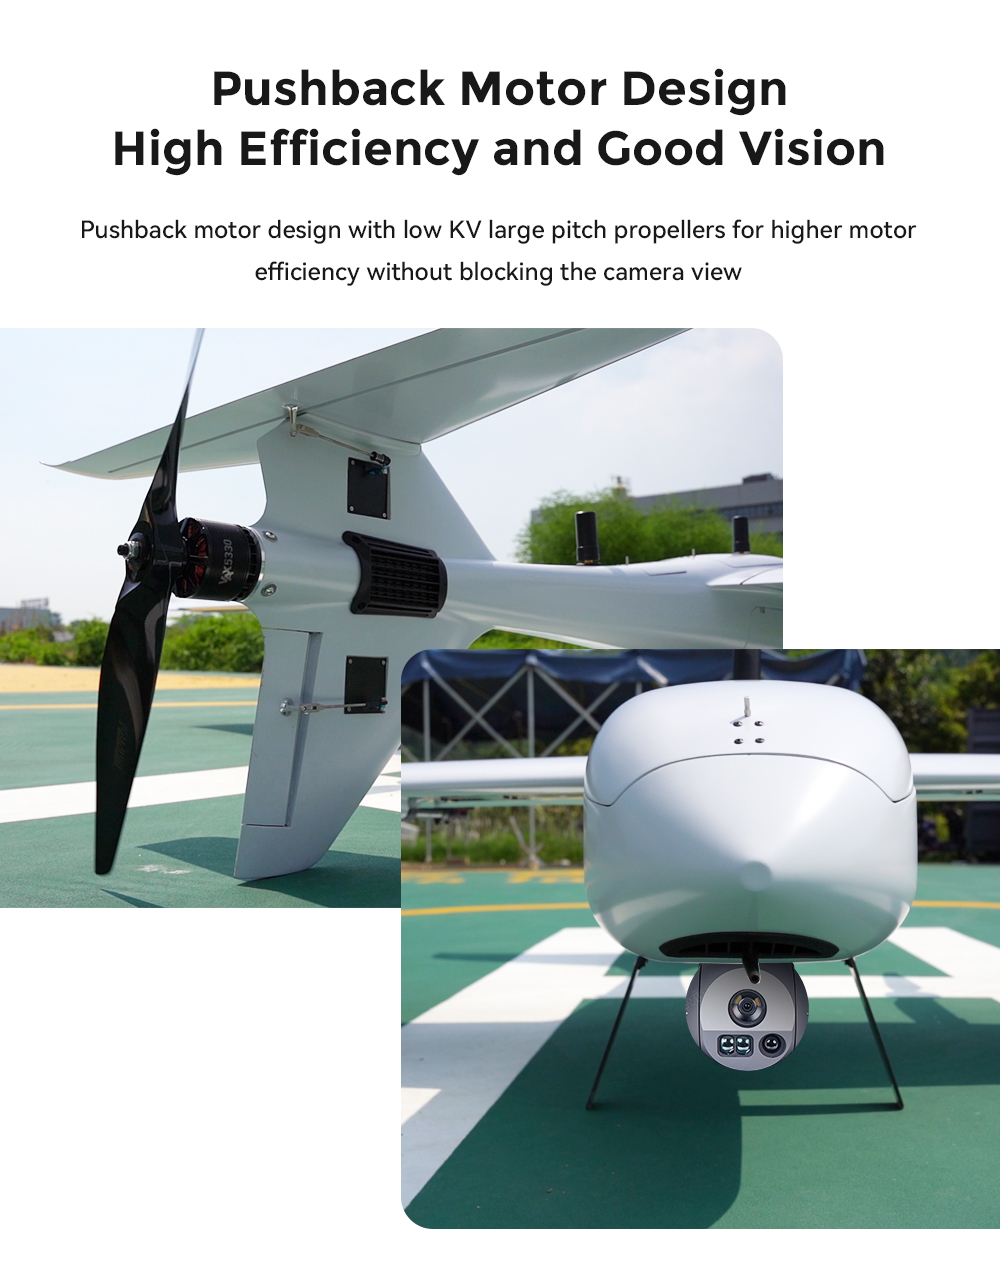 CUAV Raefly VT290 VTOL, low KV large pitch propellers for higher motor efficiency without blocking the camera view .